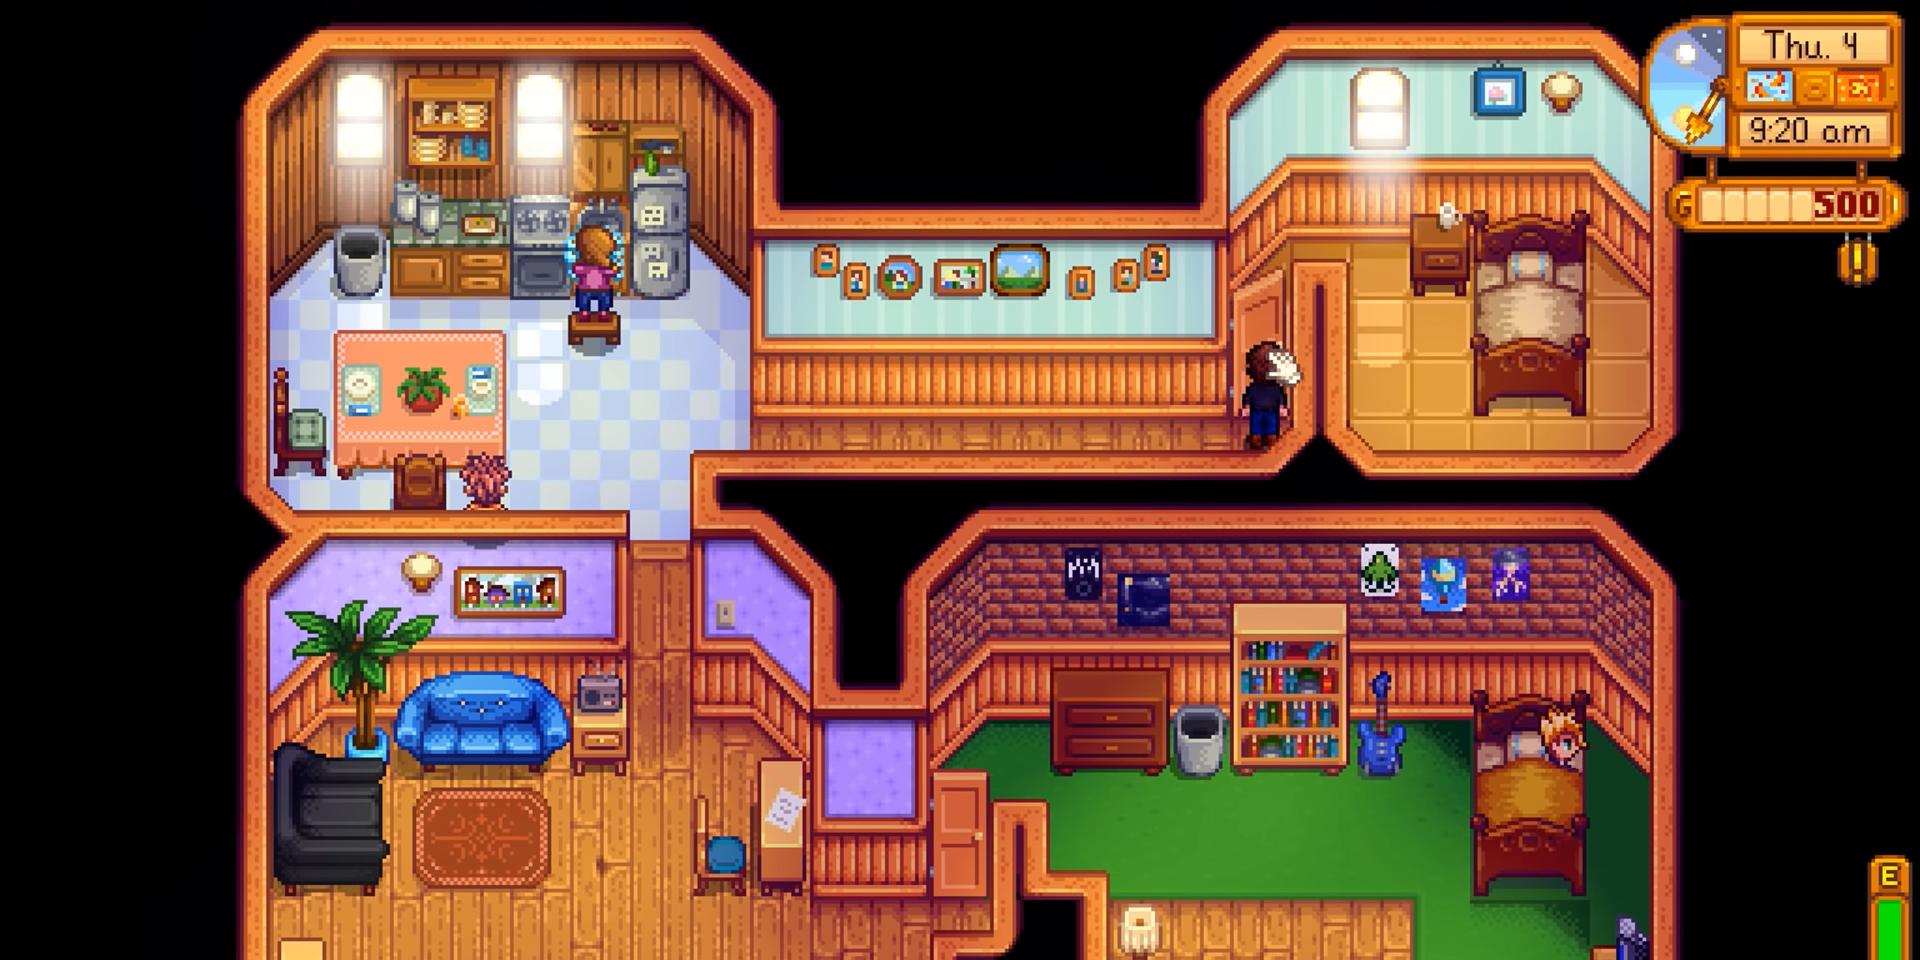 A player visits Jodi's house in Stardew Valley